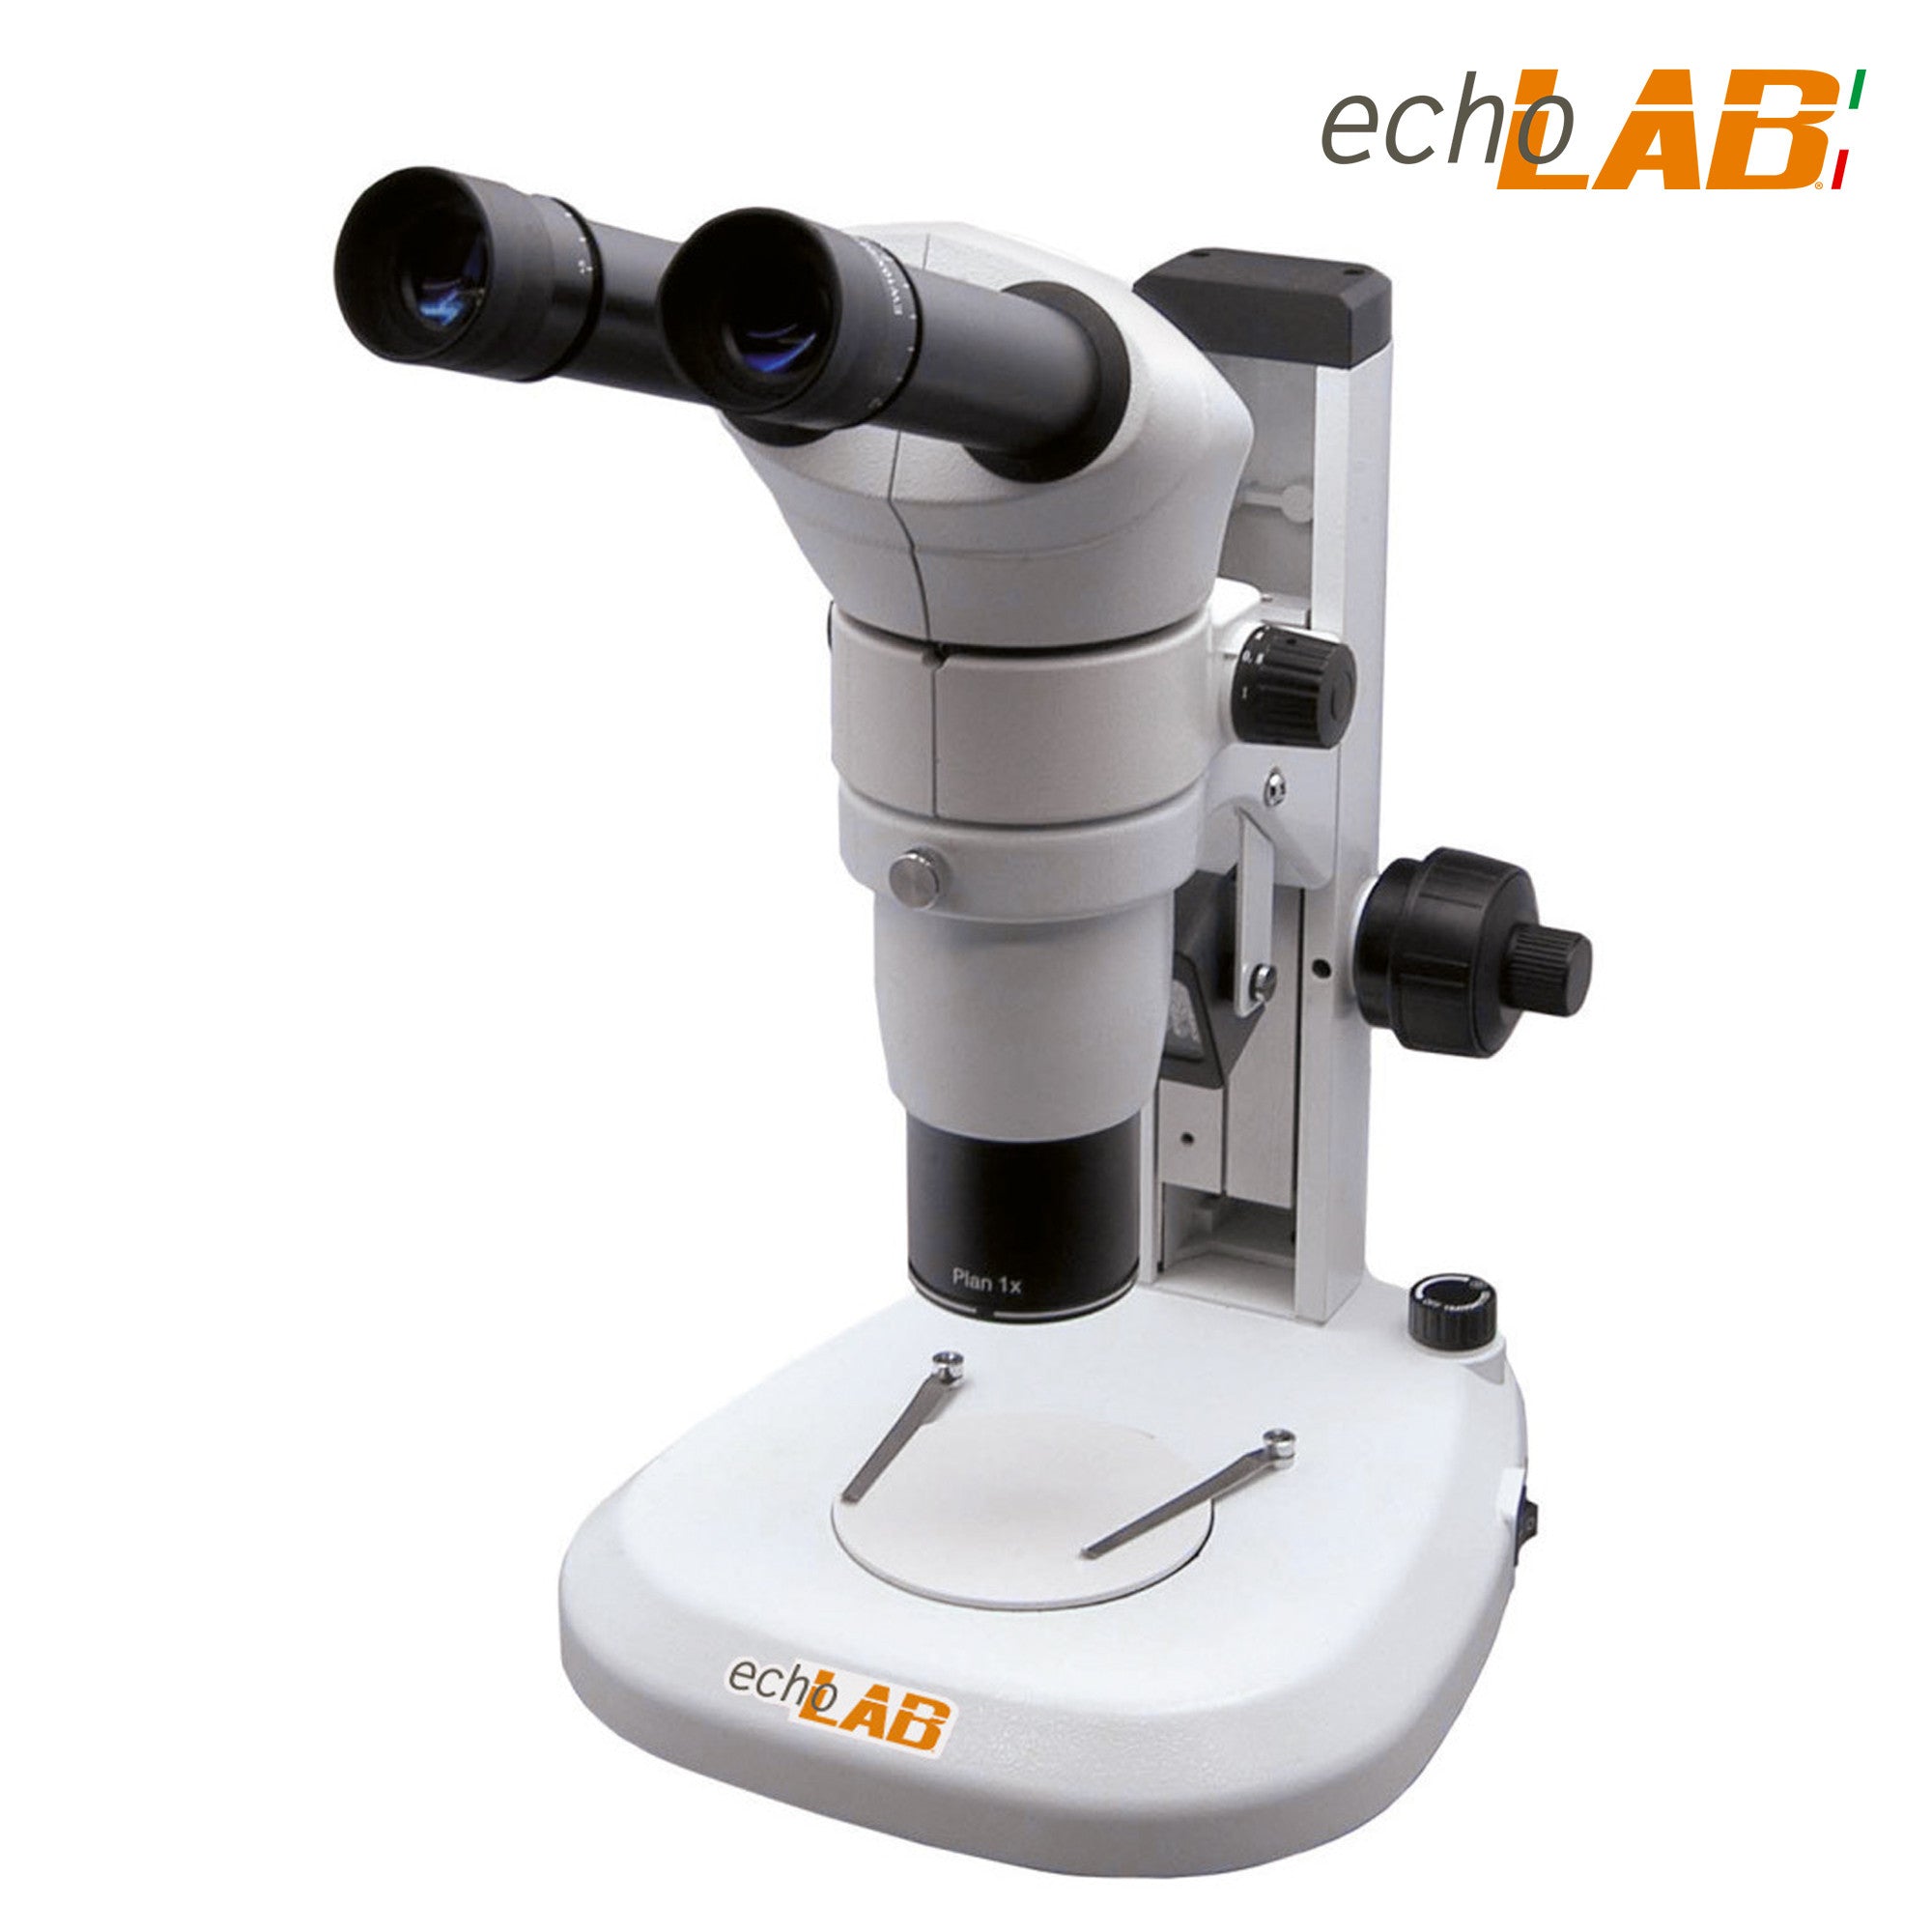 Continuous Zoom Stereo Microscope zoom ratio from 1:6 to 1:10 binocular - echoLAB